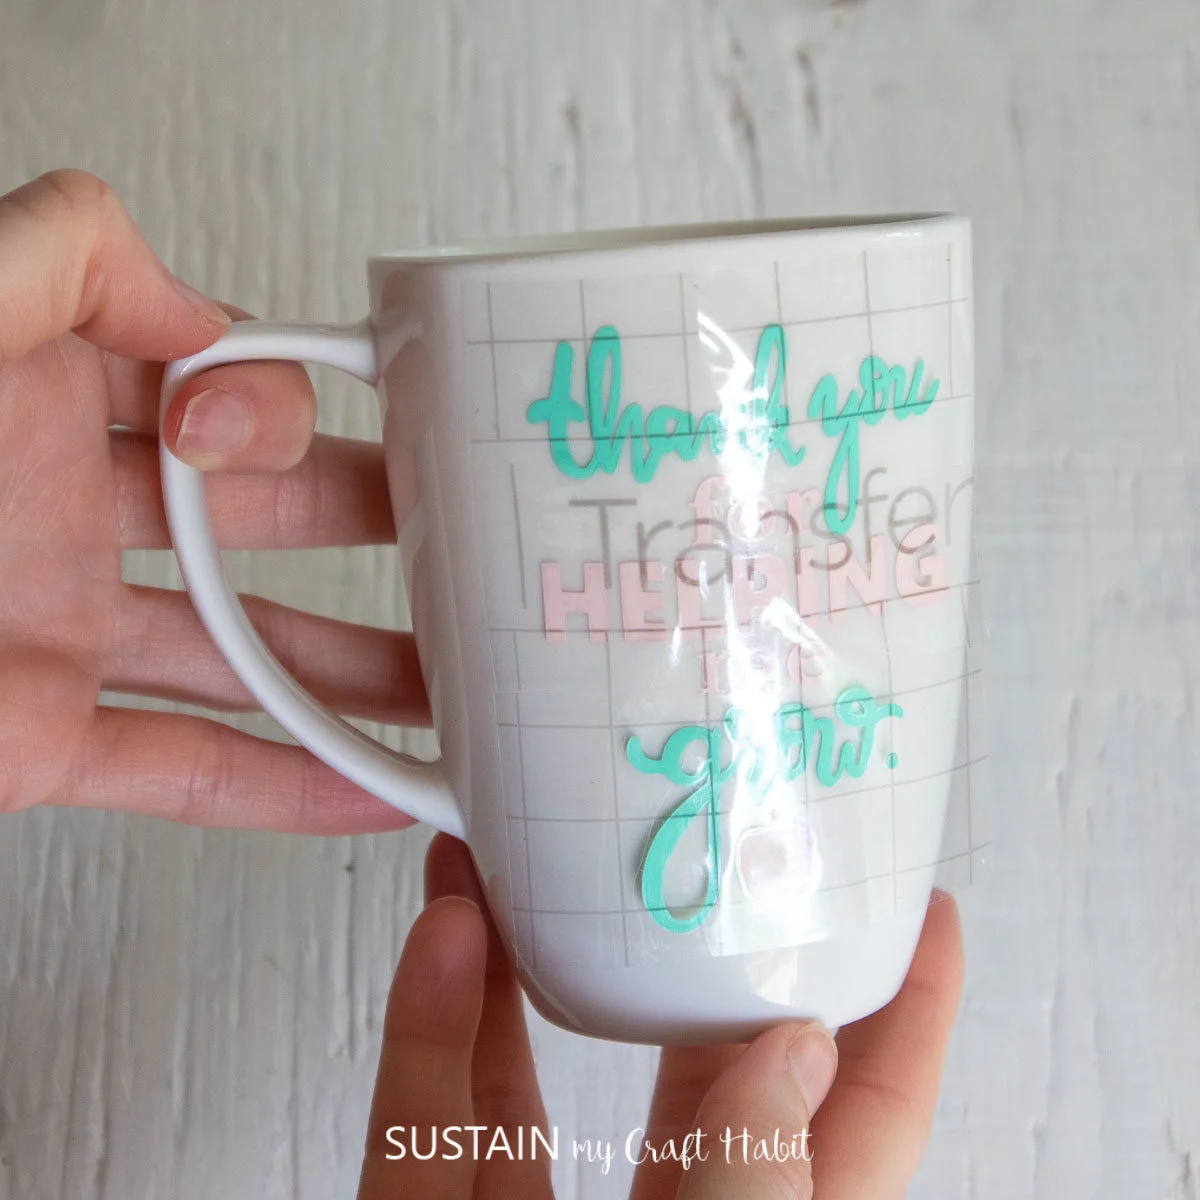 Th transfer tape and phrase placed onto a coffee mug.